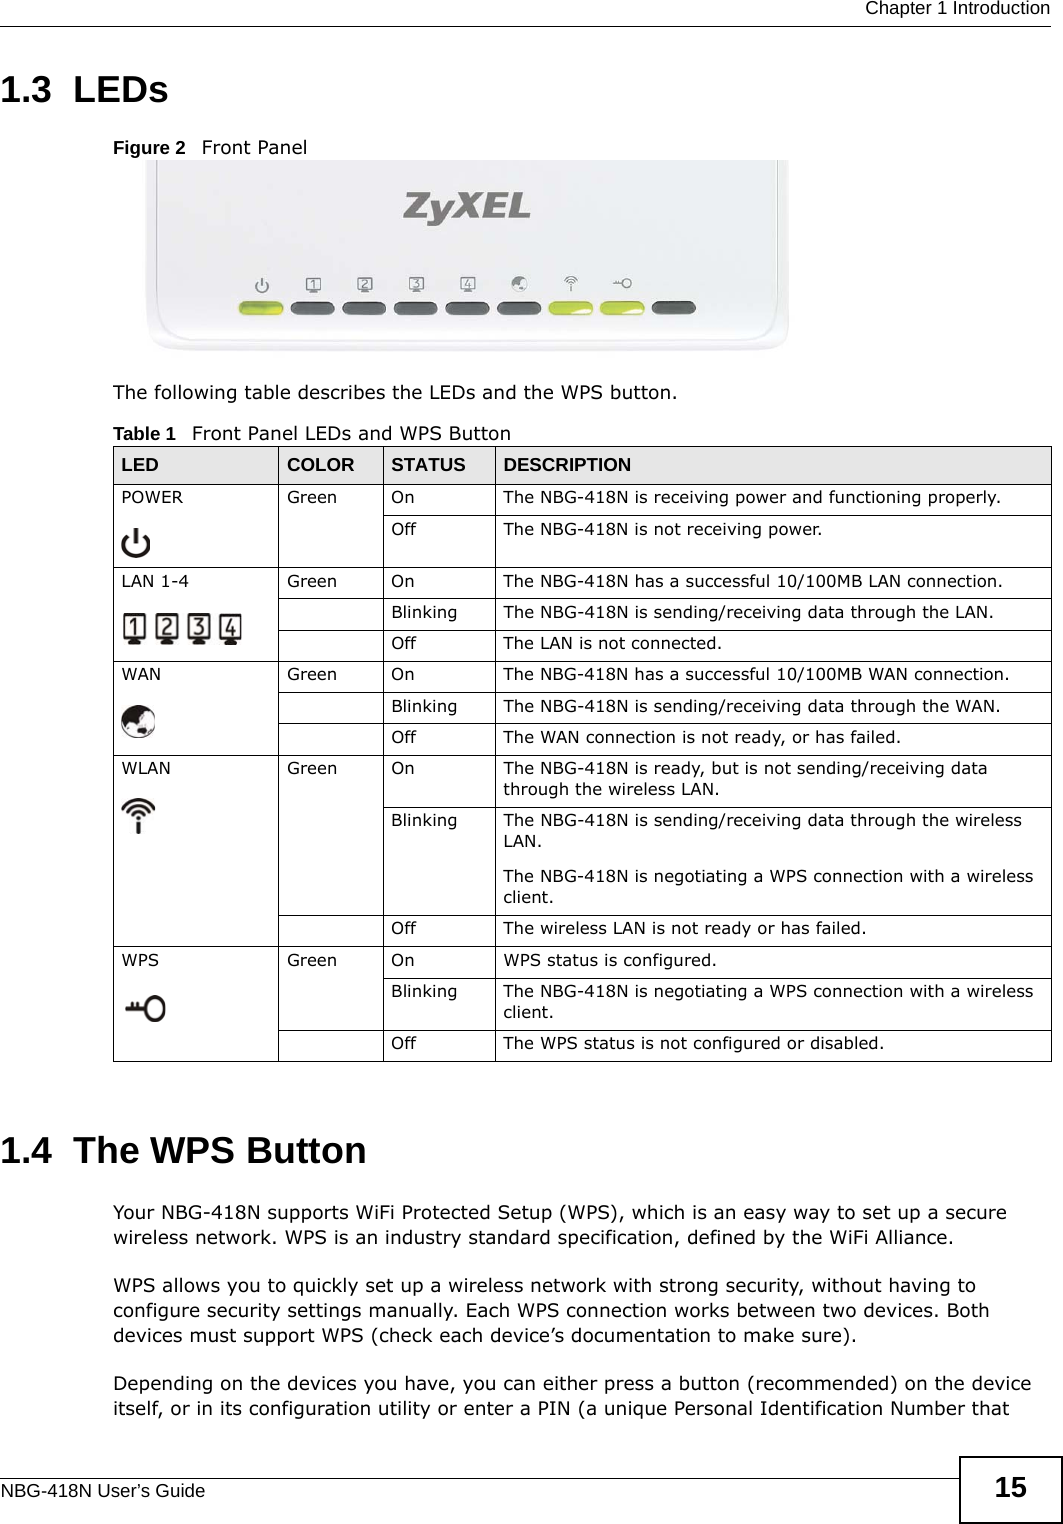  Chapter 1 IntroductionNBG-418N User’s Guide 151.3  LEDsFigure 2   Front PanelThe following table describes the LEDs and the WPS button.1.4  The WPS ButtonYour NBG-418N supports WiFi Protected Setup (WPS), which is an easy way to set up a secure wireless network. WPS is an industry standard specification, defined by the WiFi Alliance.WPS allows you to quickly set up a wireless network with strong security, without having to configure security settings manually. Each WPS connection works between two devices. Both devices must support WPS (check each device’s documentation to make sure). Depending on the devices you have, you can either press a button (recommended) on the device itself, or in its configuration utility or enter a PIN (a unique Personal Identification Number that Table 1   Front Panel LEDs and WPS ButtonLED COLOR STATUS DESCRIPTIONPOWER Green On The NBG-418N is receiving power and functioning properly. Off The NBG-418N is not receiving power.LAN 1-4 Green On The NBG-418N has a successful 10/100MB LAN connection. Blinking The NBG-418N is sending/receiving data through the LAN.Off The LAN is not connected.WAN Green On The NBG-418N has a successful 10/100MB WAN connection.Blinking The NBG-418N is sending/receiving data through the WAN.Off The WAN connection is not ready, or has failed.WLAN  Green On The NBG-418N is ready, but is not sending/receiving data through the wireless LAN. Blinking The NBG-418N is sending/receiving data through the wireless LAN.The NBG-418N is negotiating a WPS connection with a wireless client.Off The wireless LAN is not ready or has failed.WPS Green On WPS status is configured. Blinking The NBG-418N is negotiating a WPS connection with a wireless client.Off The WPS status is not configured or disabled.